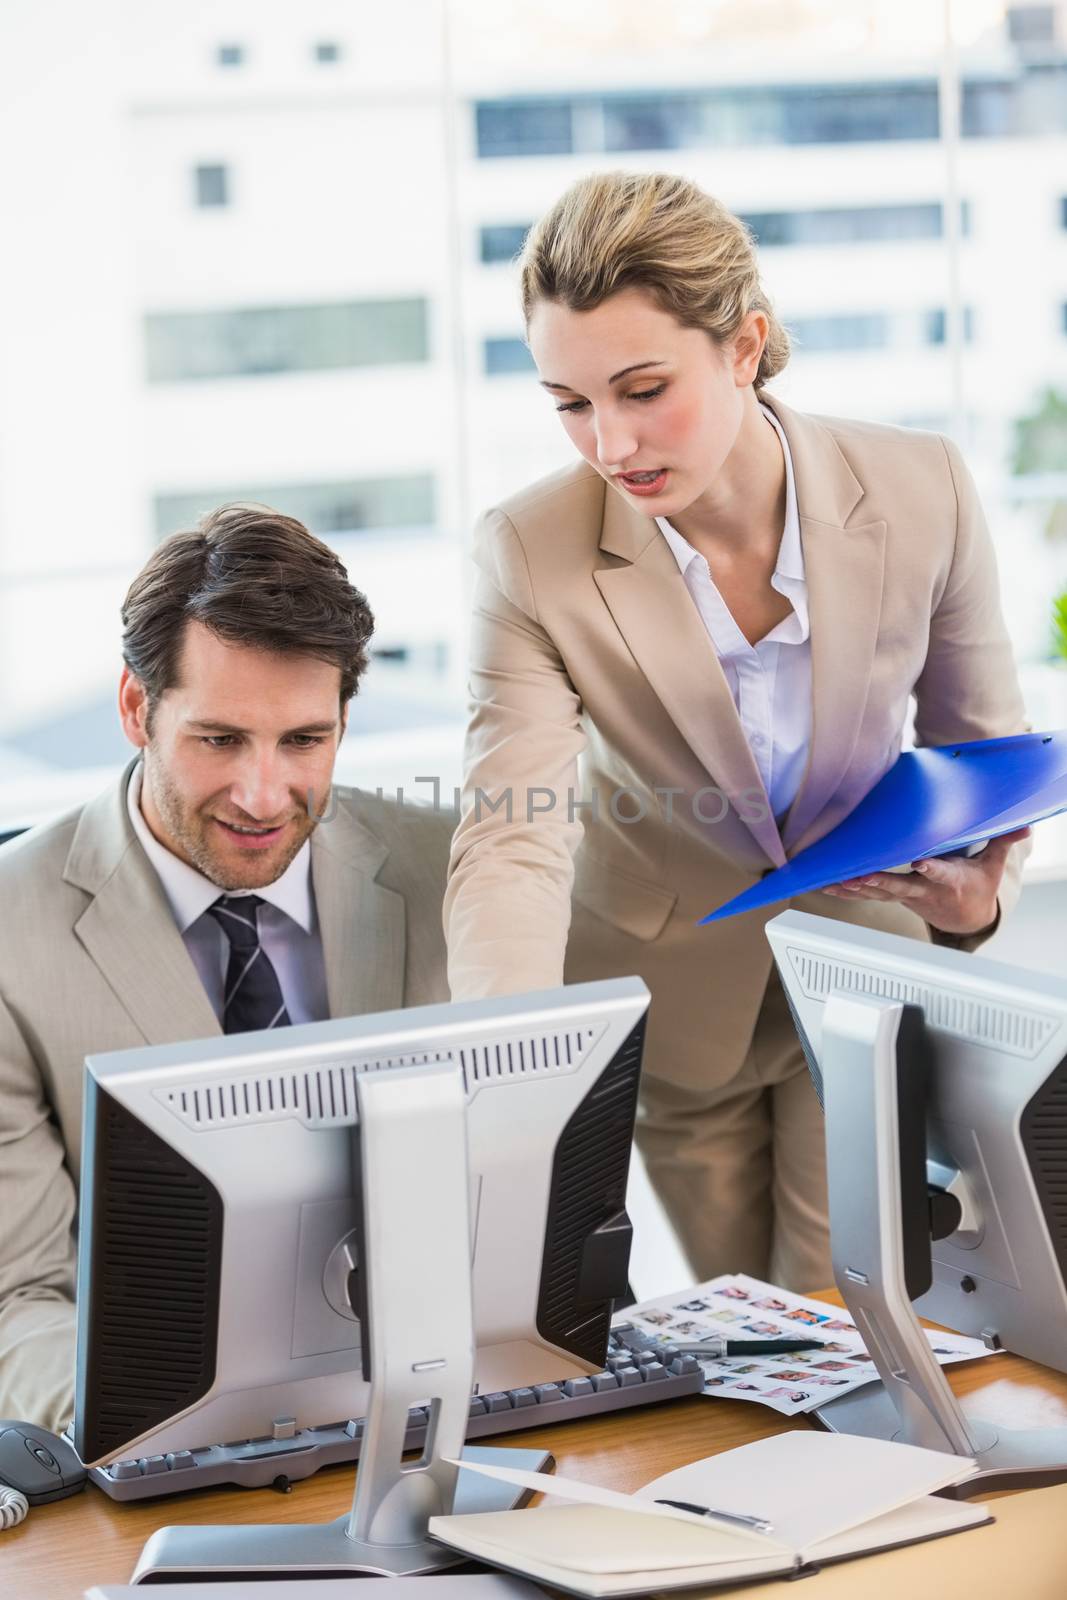 Woman showing her colleague something on the screen at work